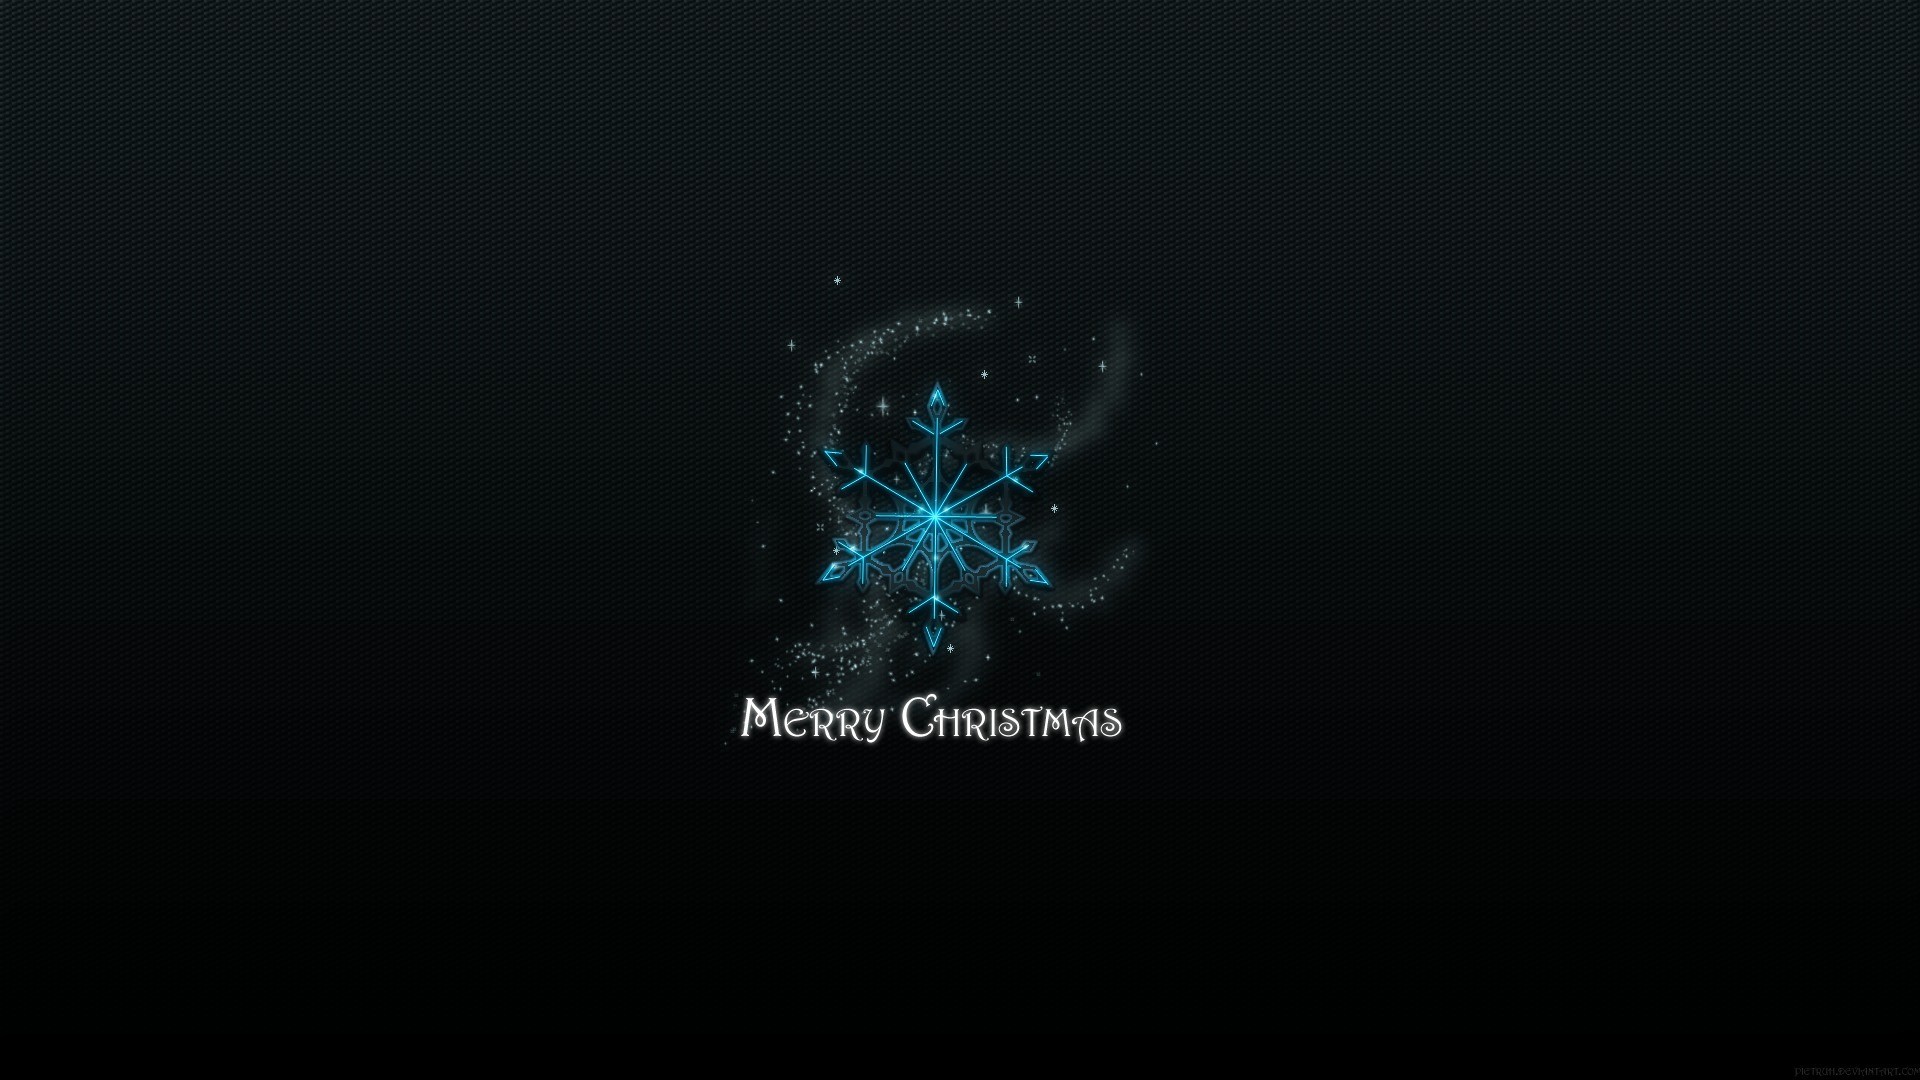 General 1920x1080 holiday Christmas ornaments  snowflakes minimalism digital art simple background text